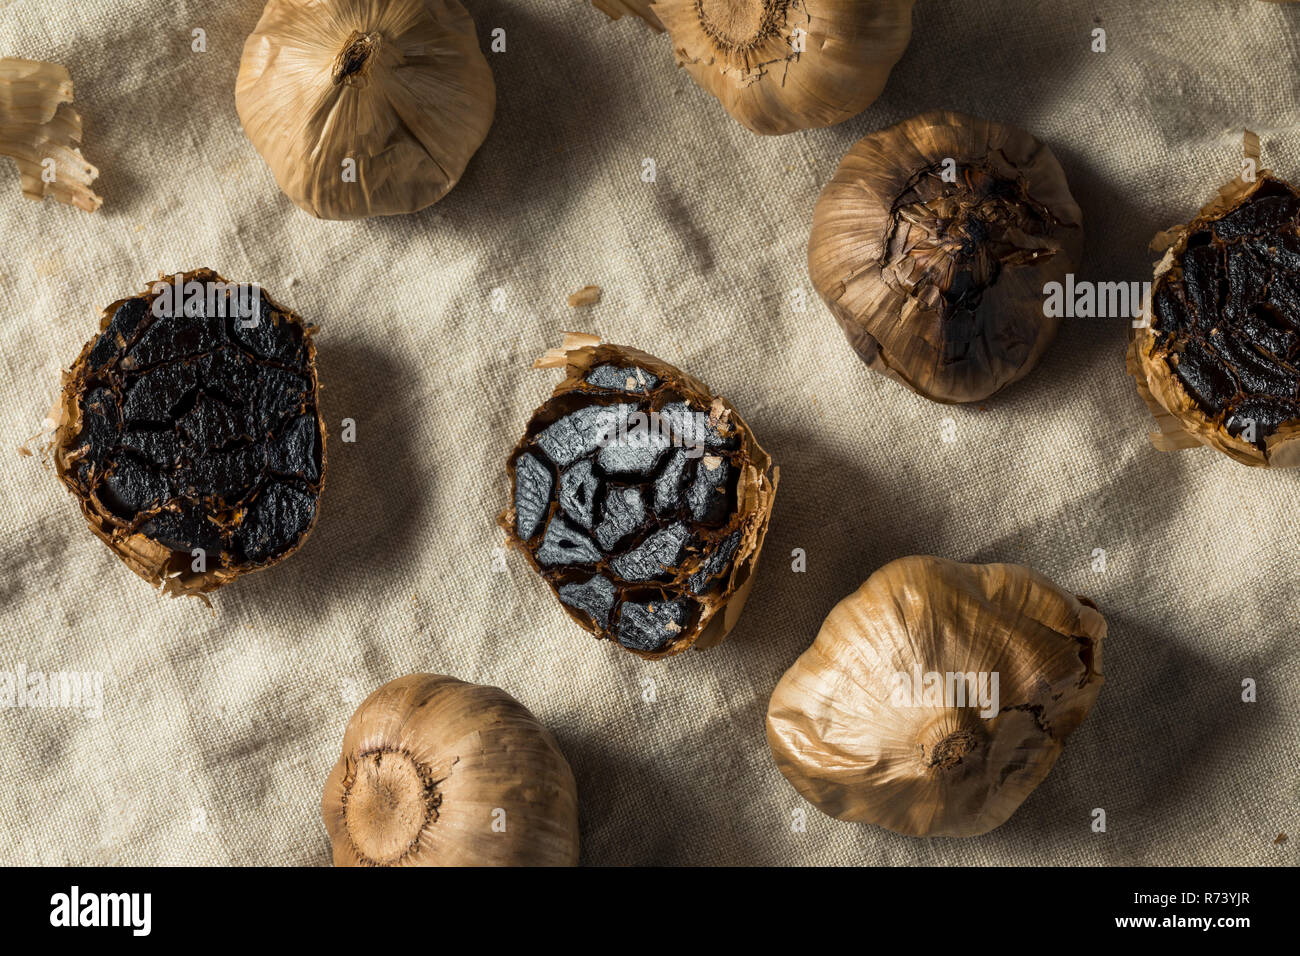 Organic Fermented Black Garlic Ready to Cook With Stock Photo